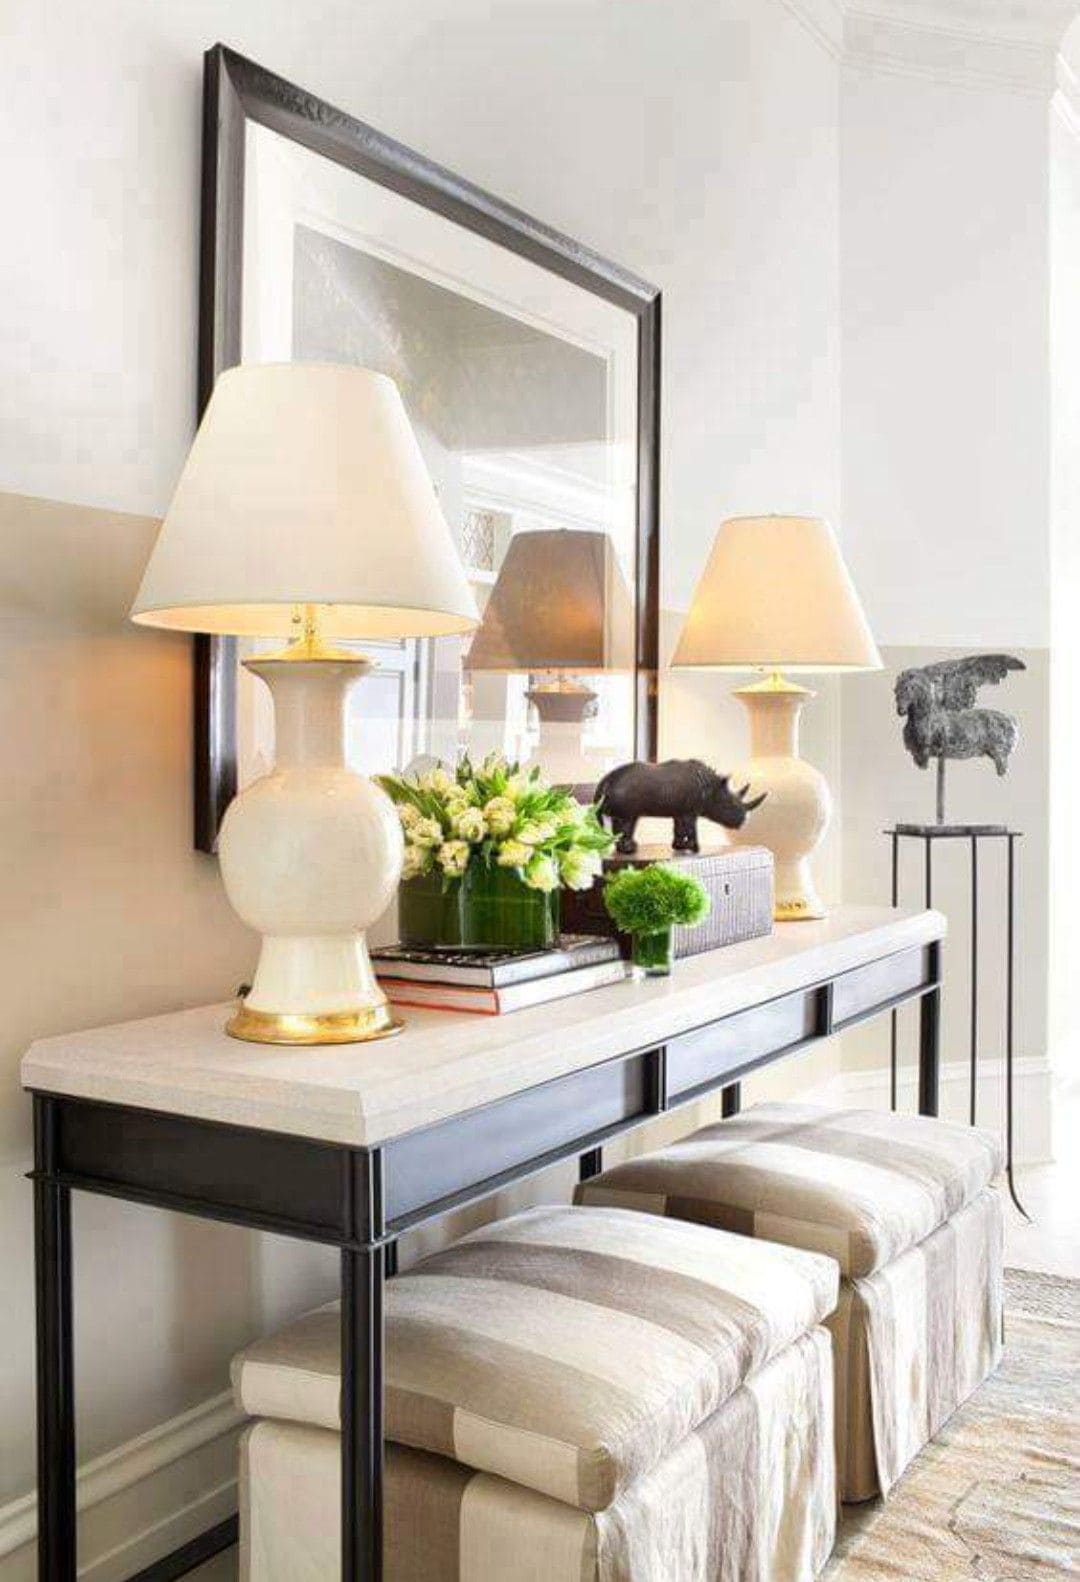 23 creative console table ideas you will love - 85